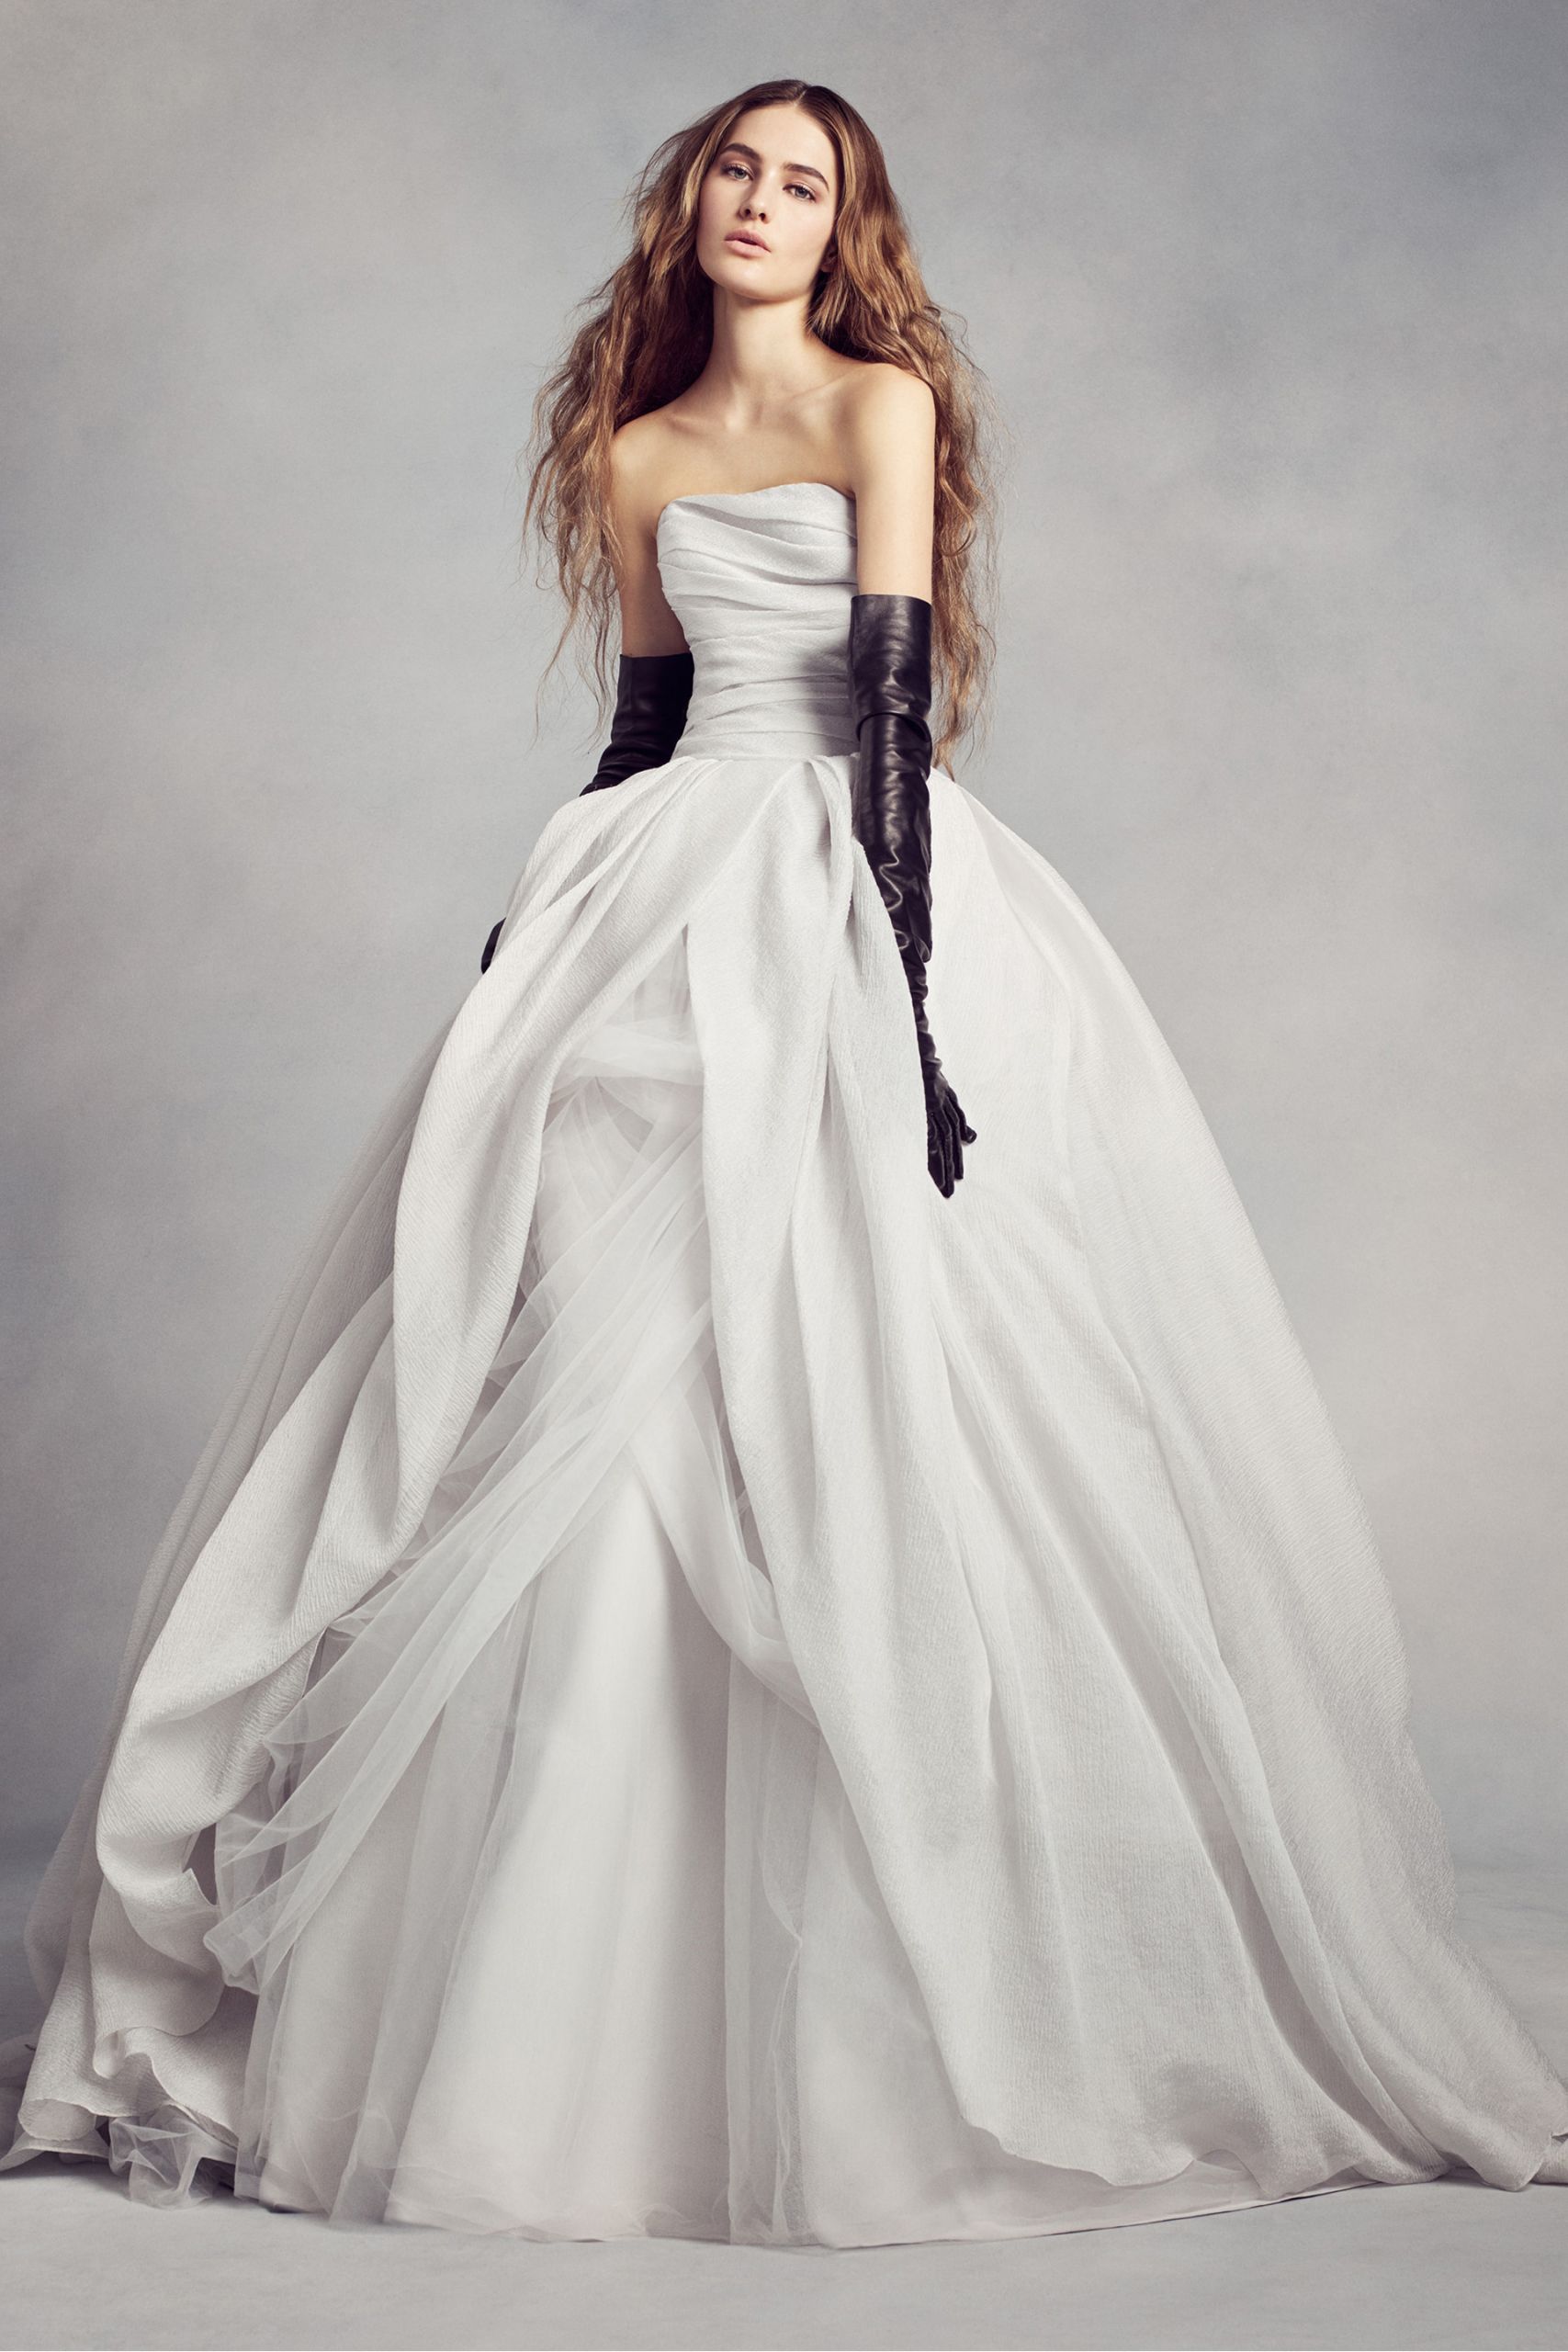 Halloween Wedding Dresses
 15 spooktacular wedding gowns that are perfect for the